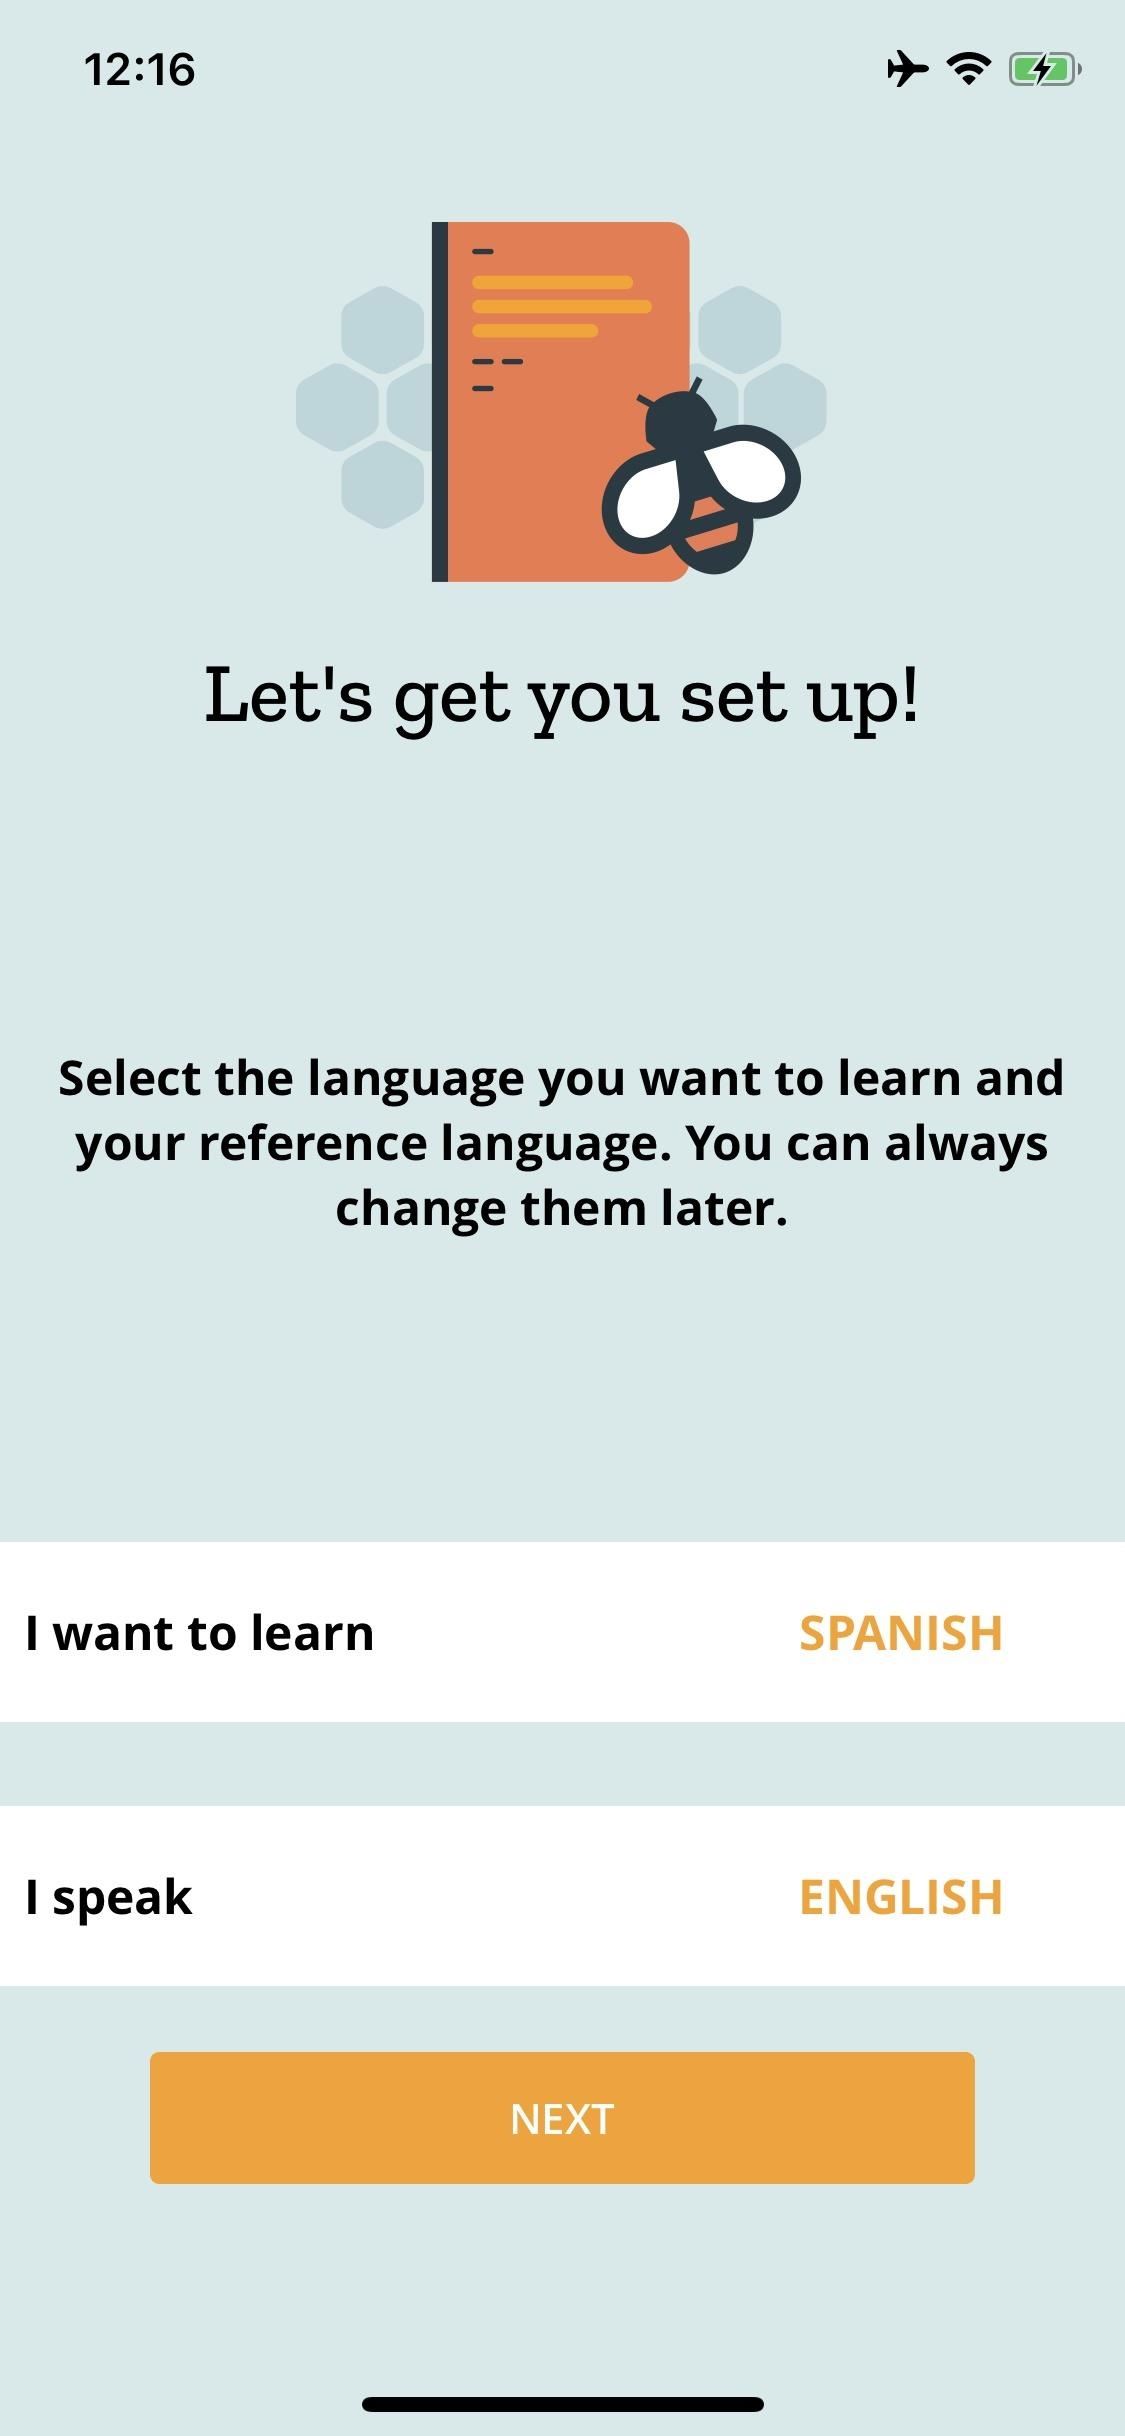 Learn a New Language While Stuck at Home Under Quarantine